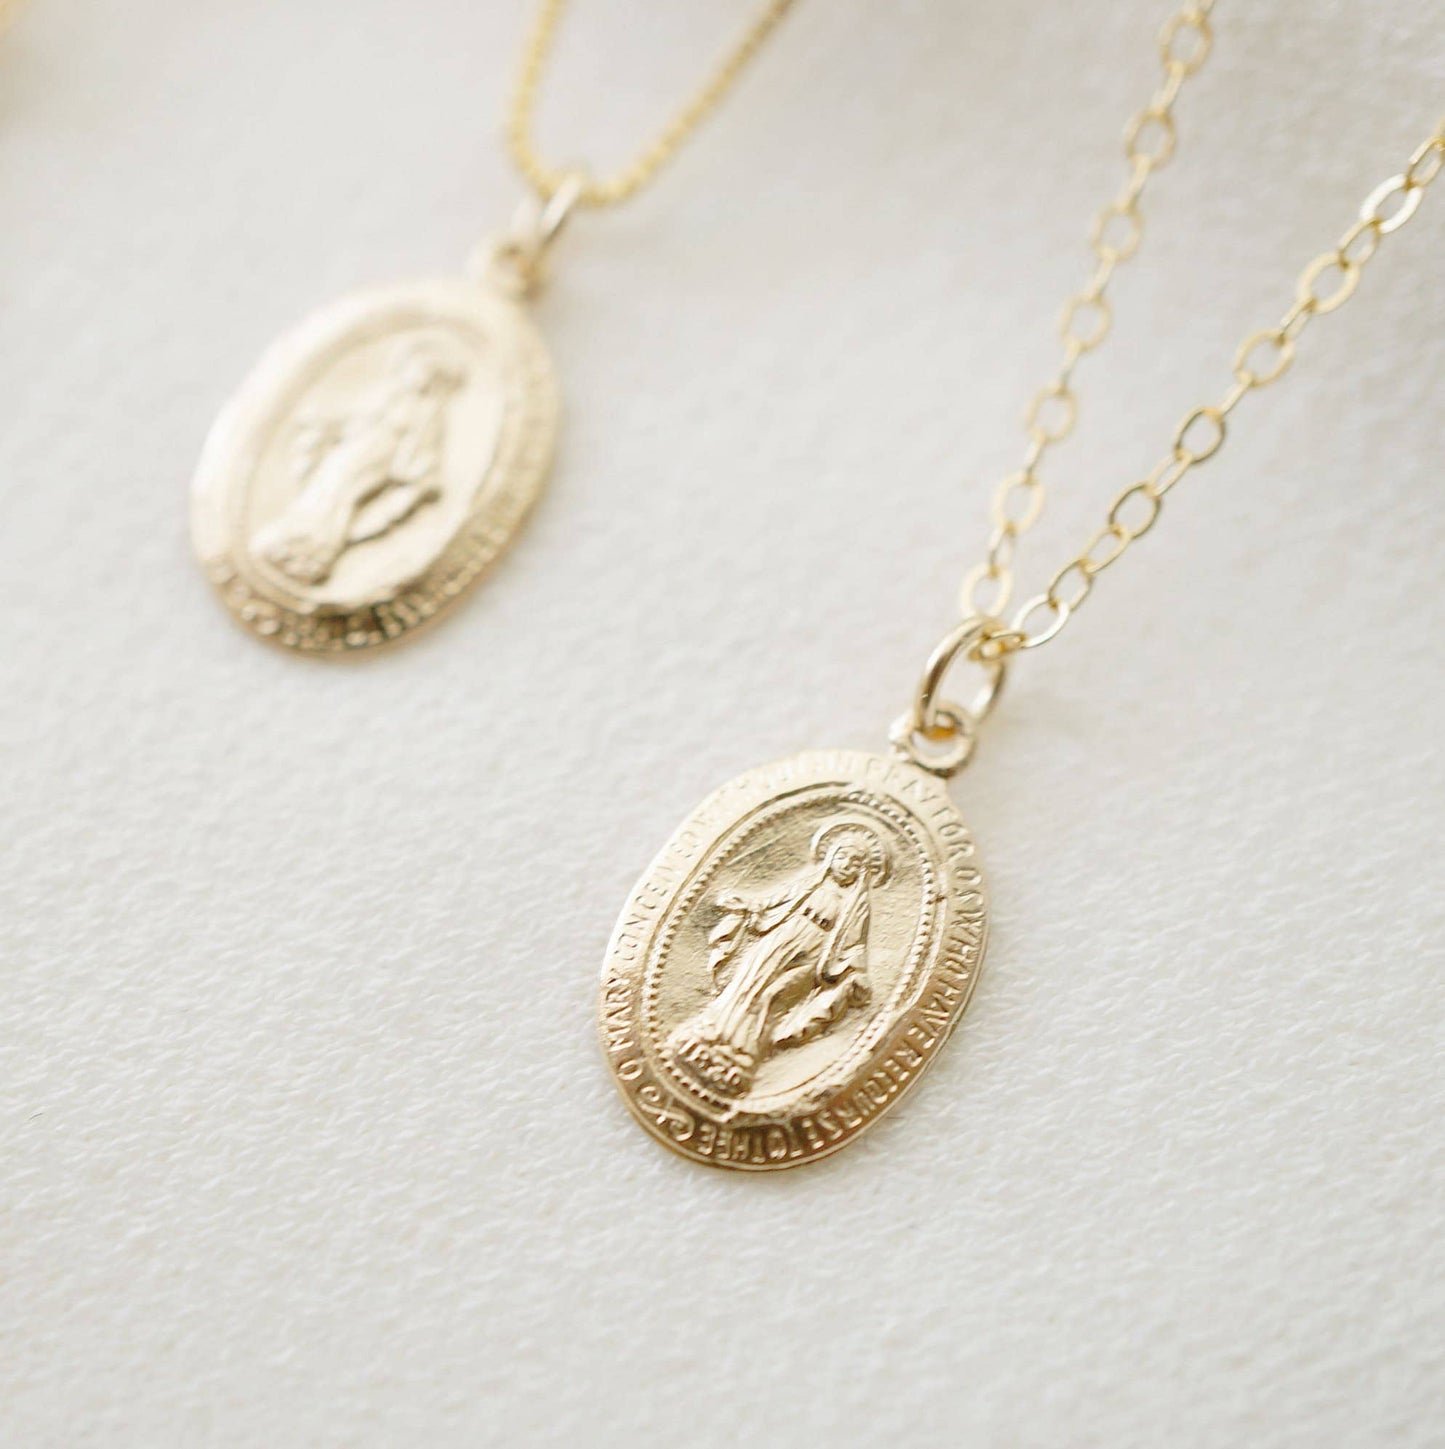 Blessed Mother Mary 14K Gold fill Necklace